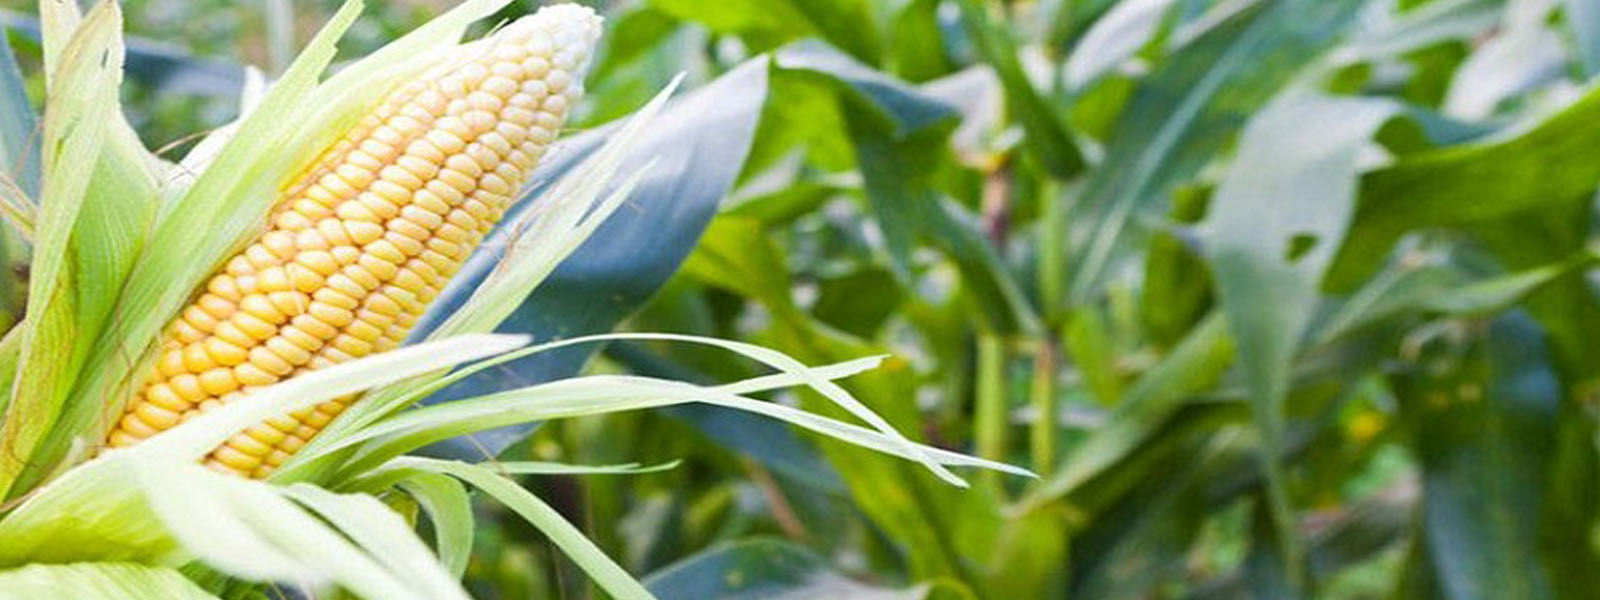 JICA & UNDP to deliver maize seeds